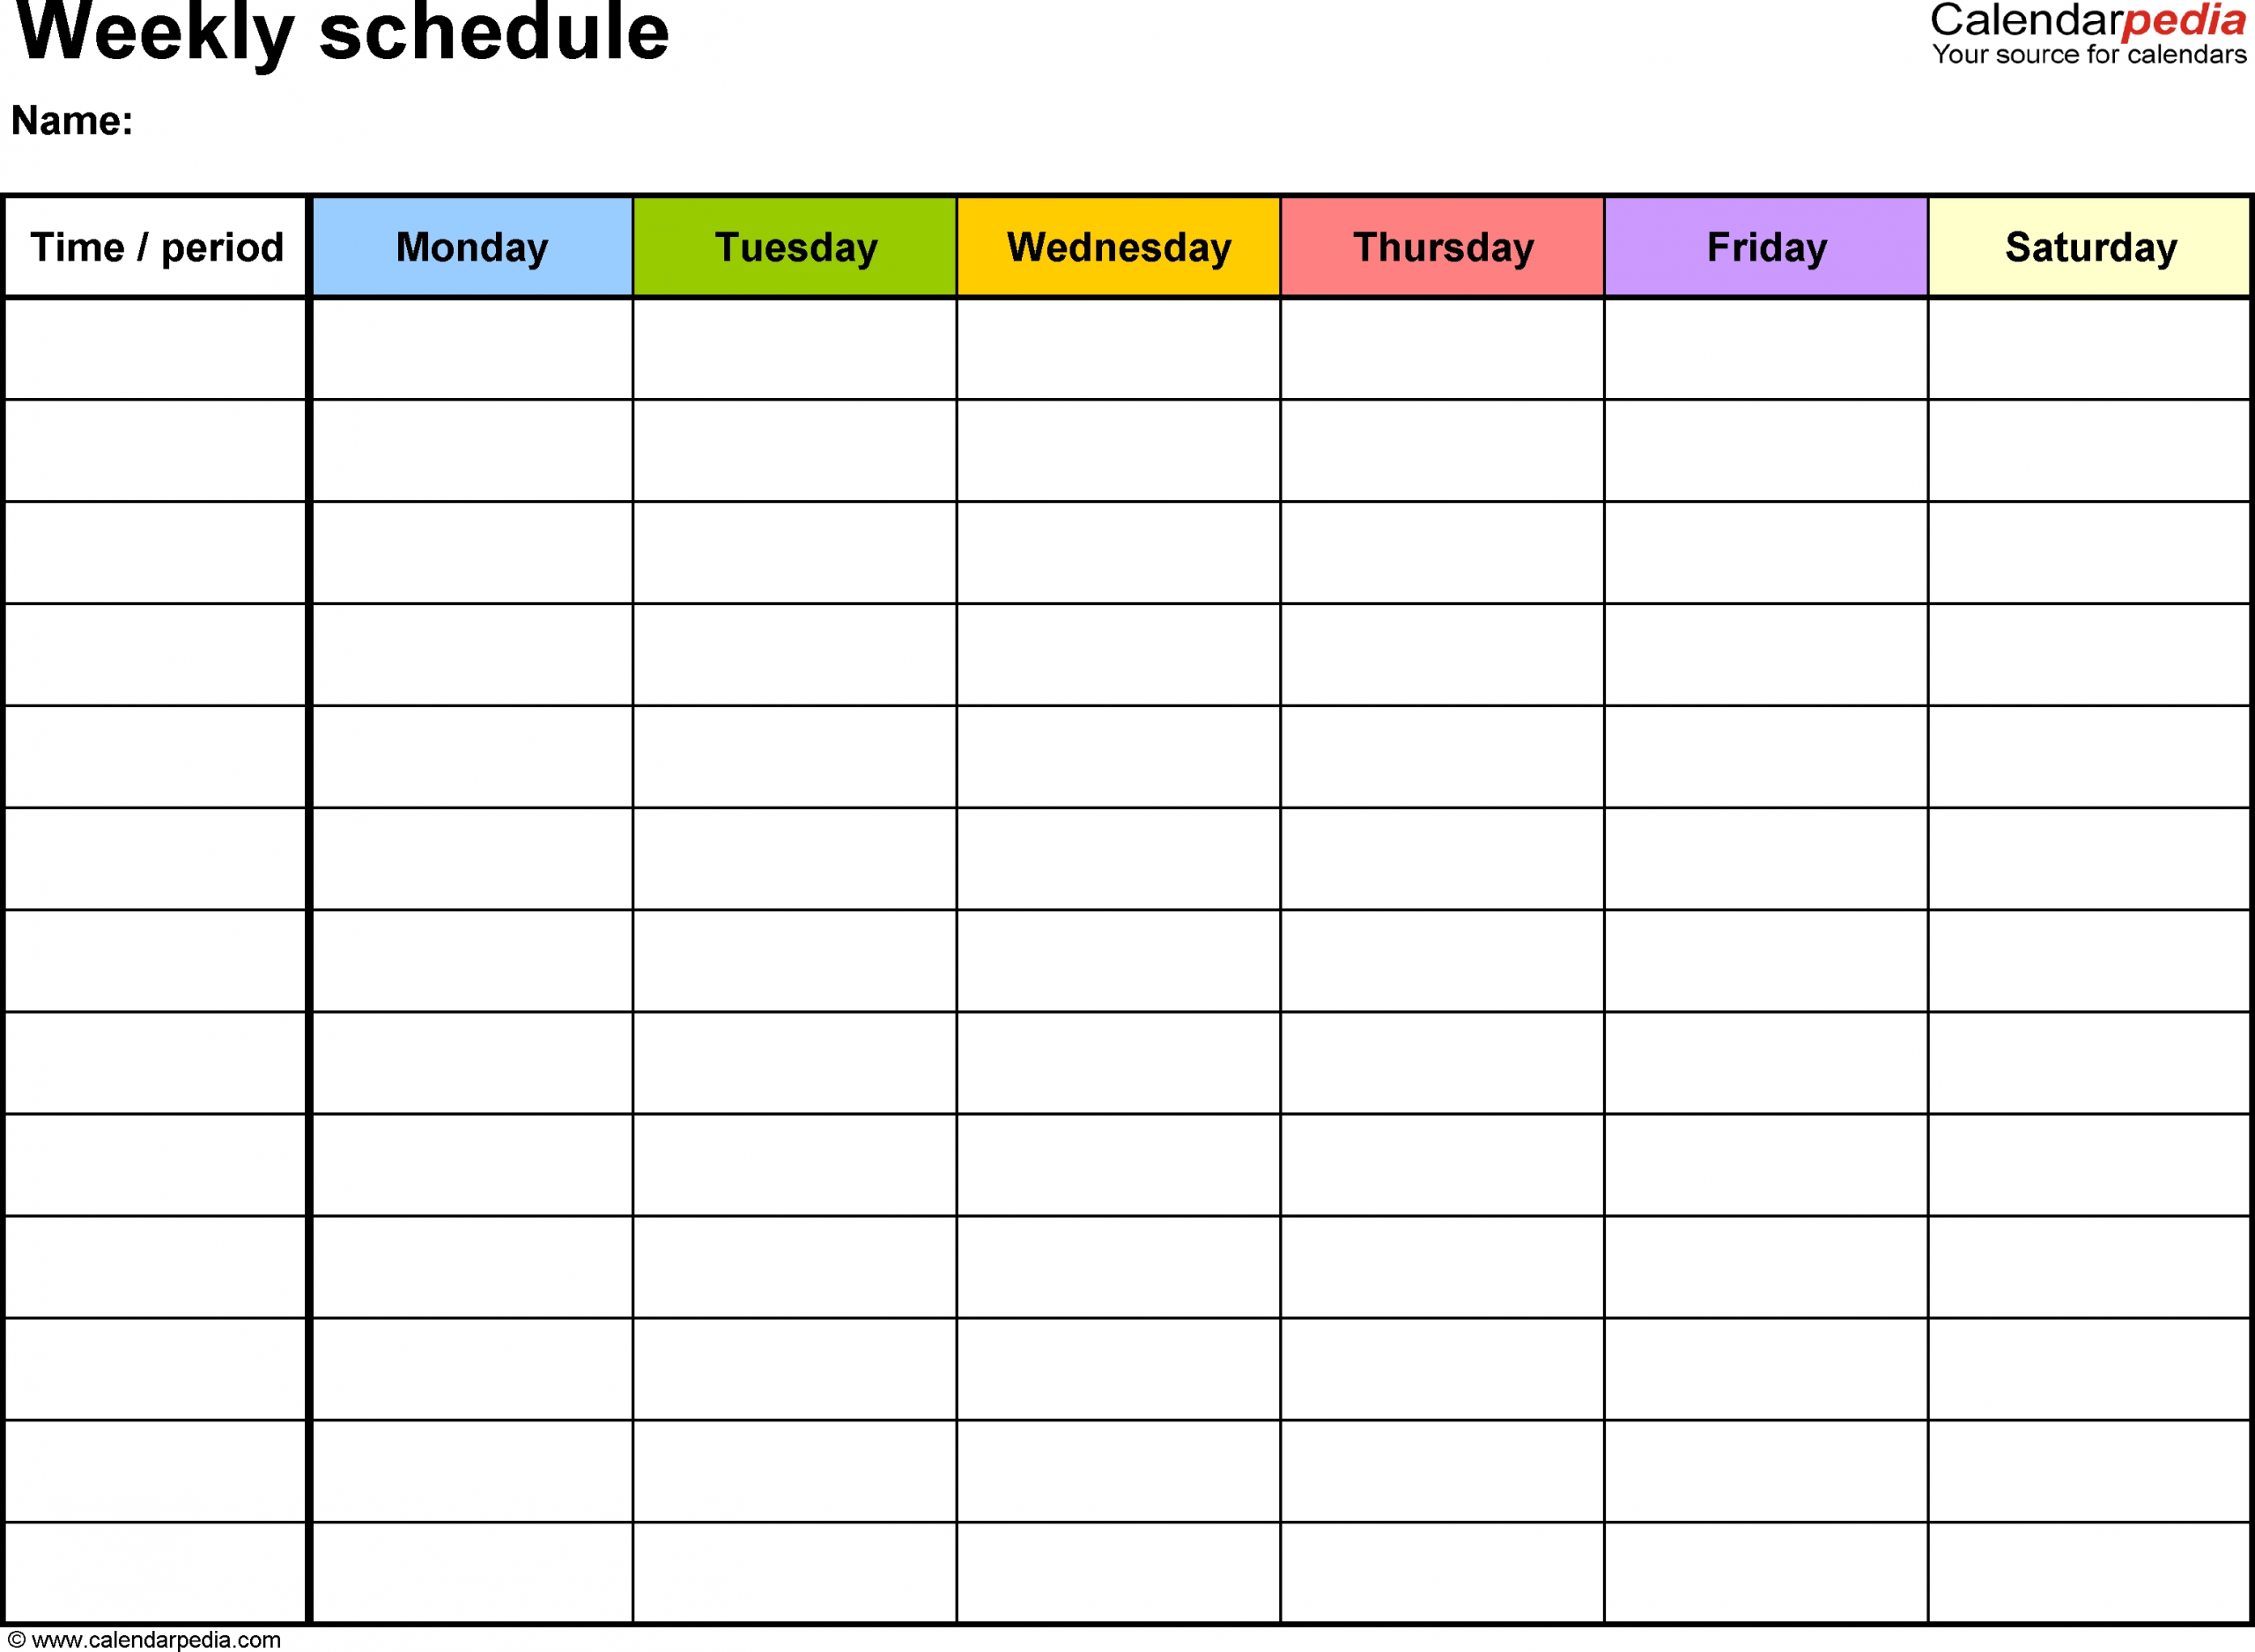 Free Weekly Schedule Templates For Word - 18 Templates 1 Week Blank Calendar Template